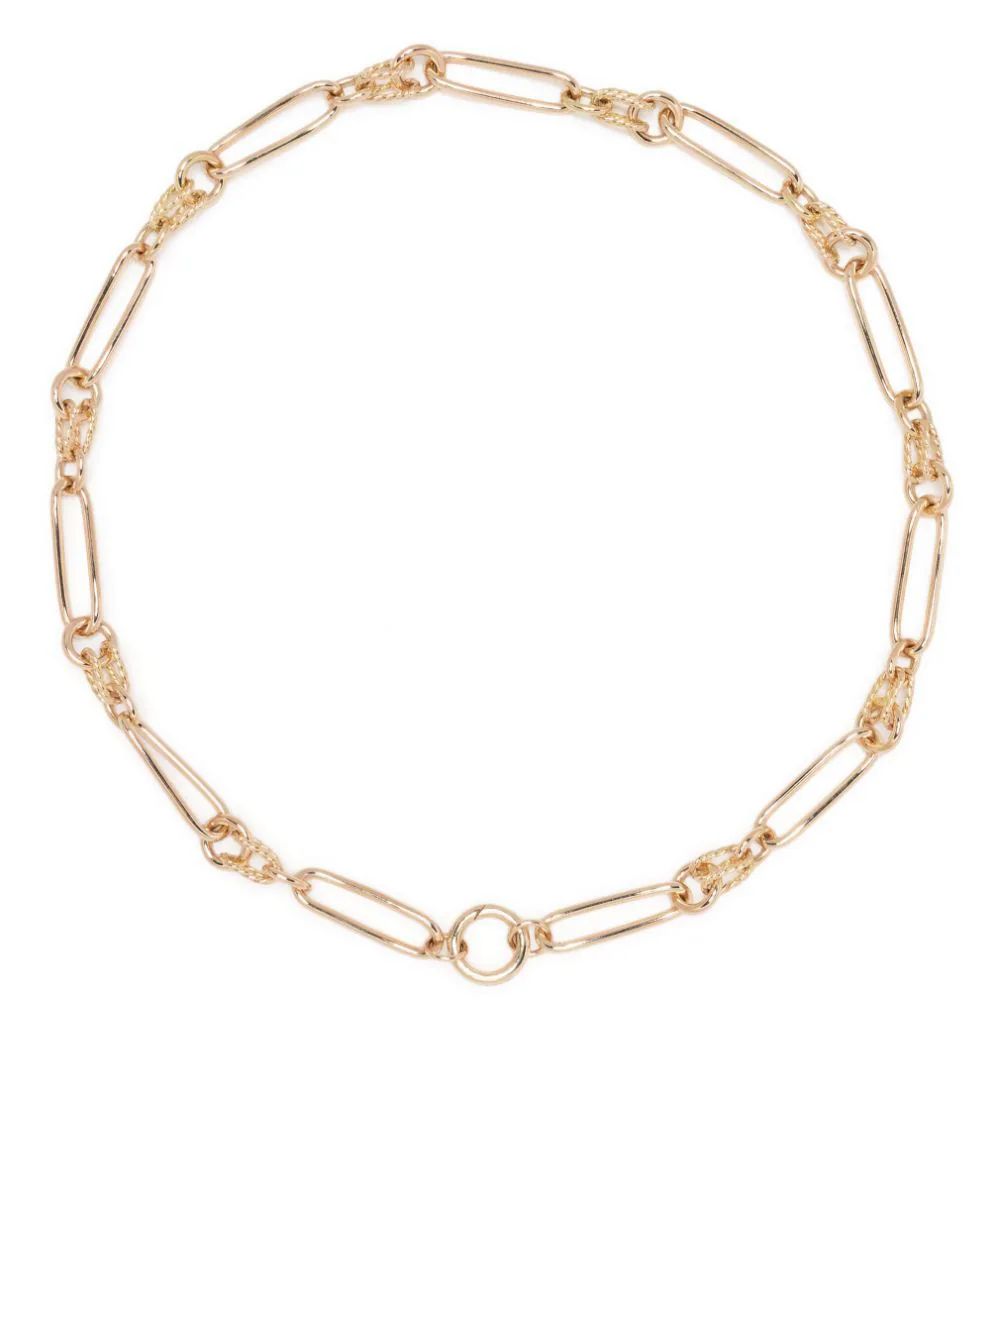 Lucy Delius Jewellery 14kt Yellow Gold Twisted Link Necklace - Farfetch | Farfetch Global